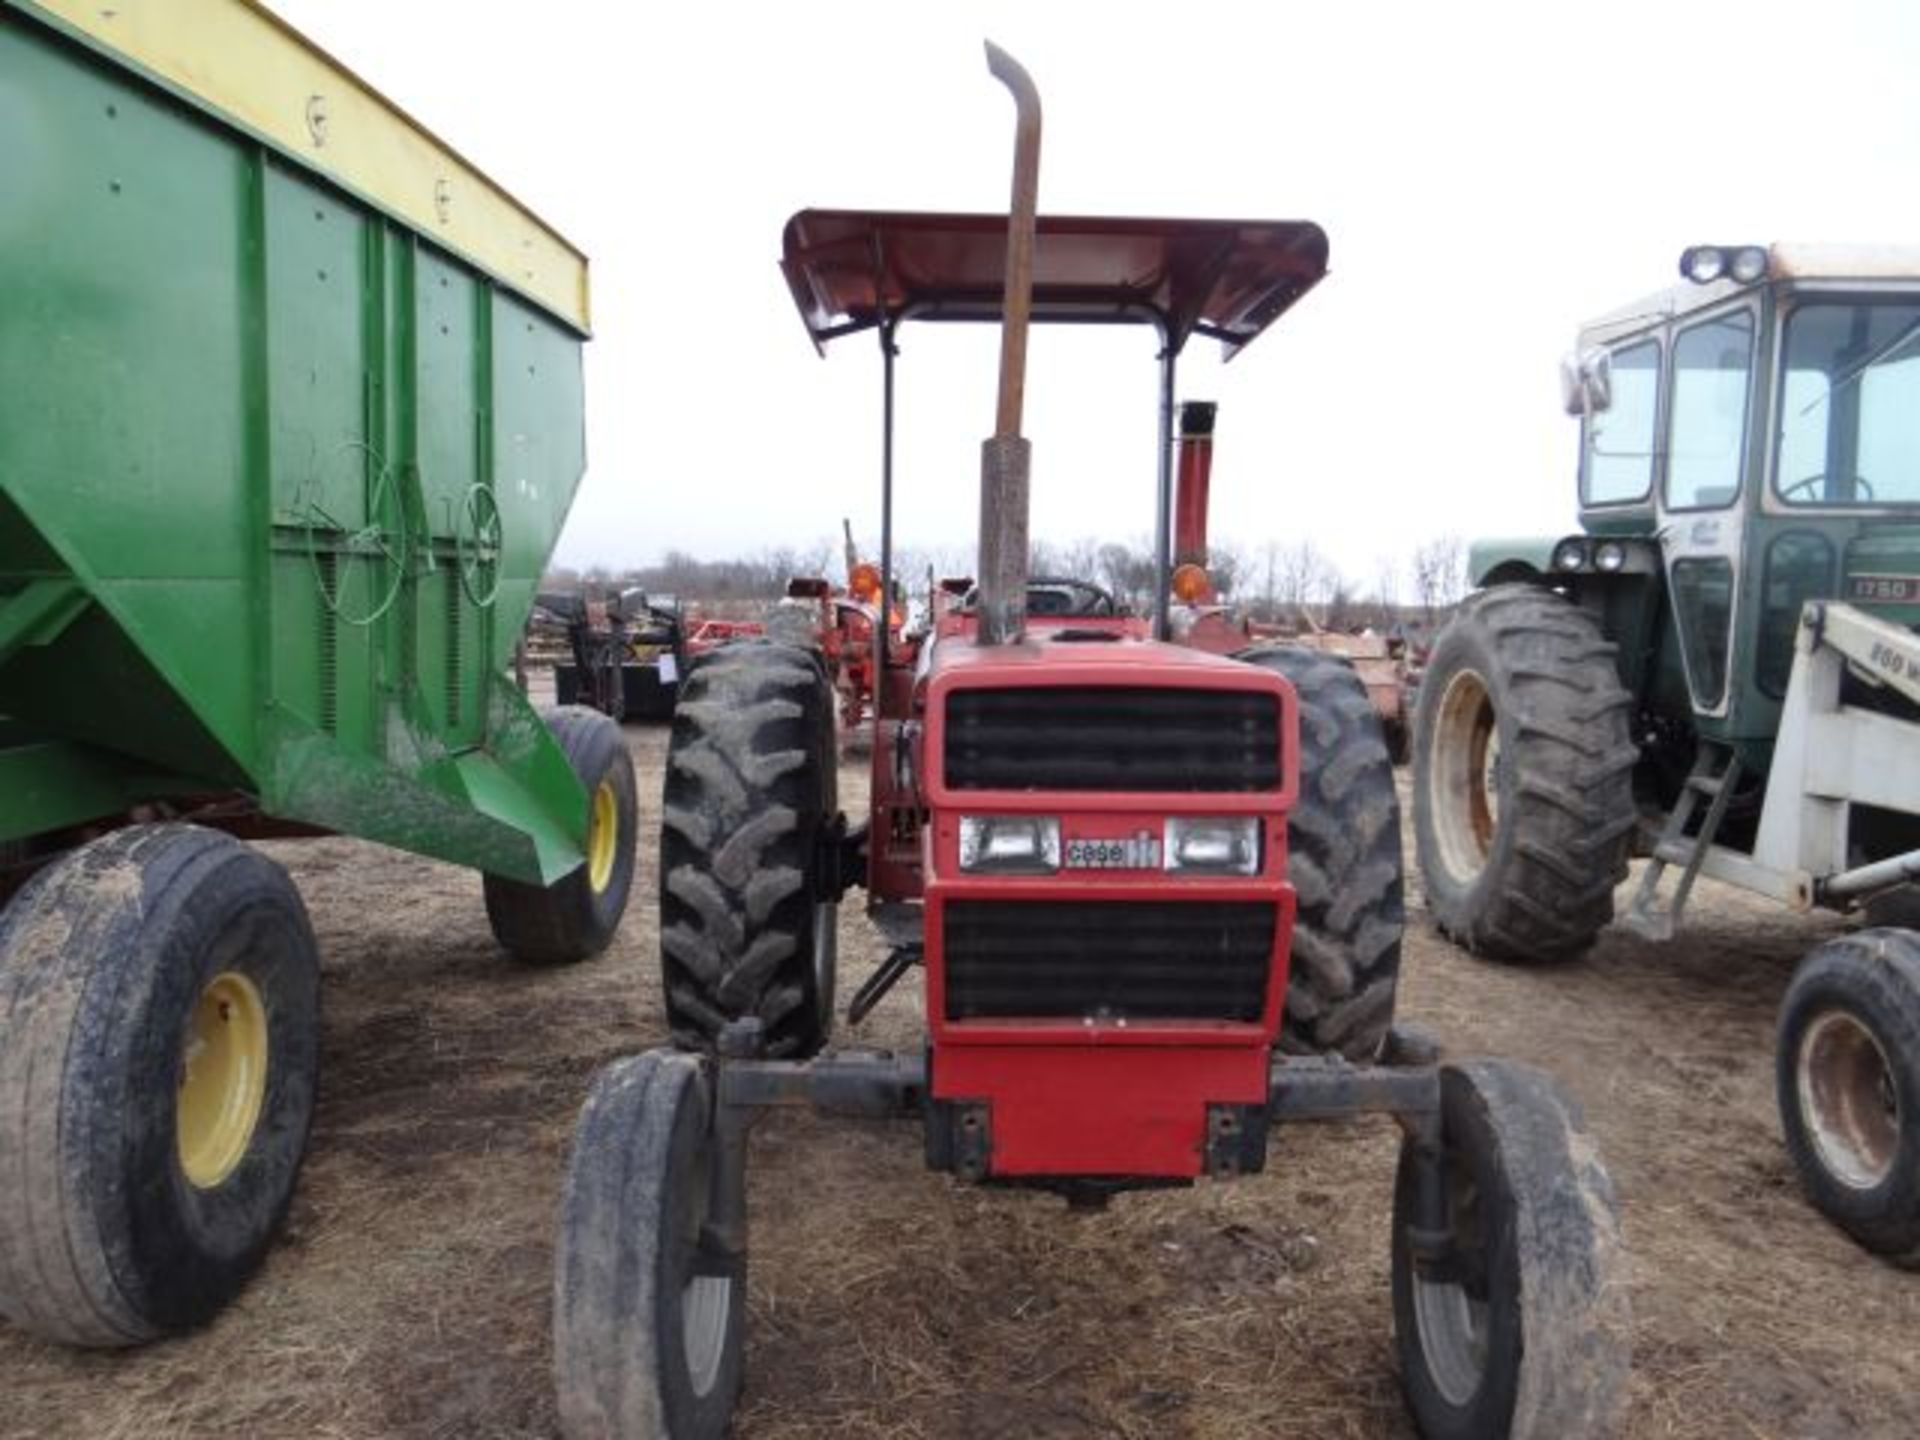 Case IH 585 Tractor, 1987 1923 hrs, Runs Great, Good Tires - Image 2 of 5